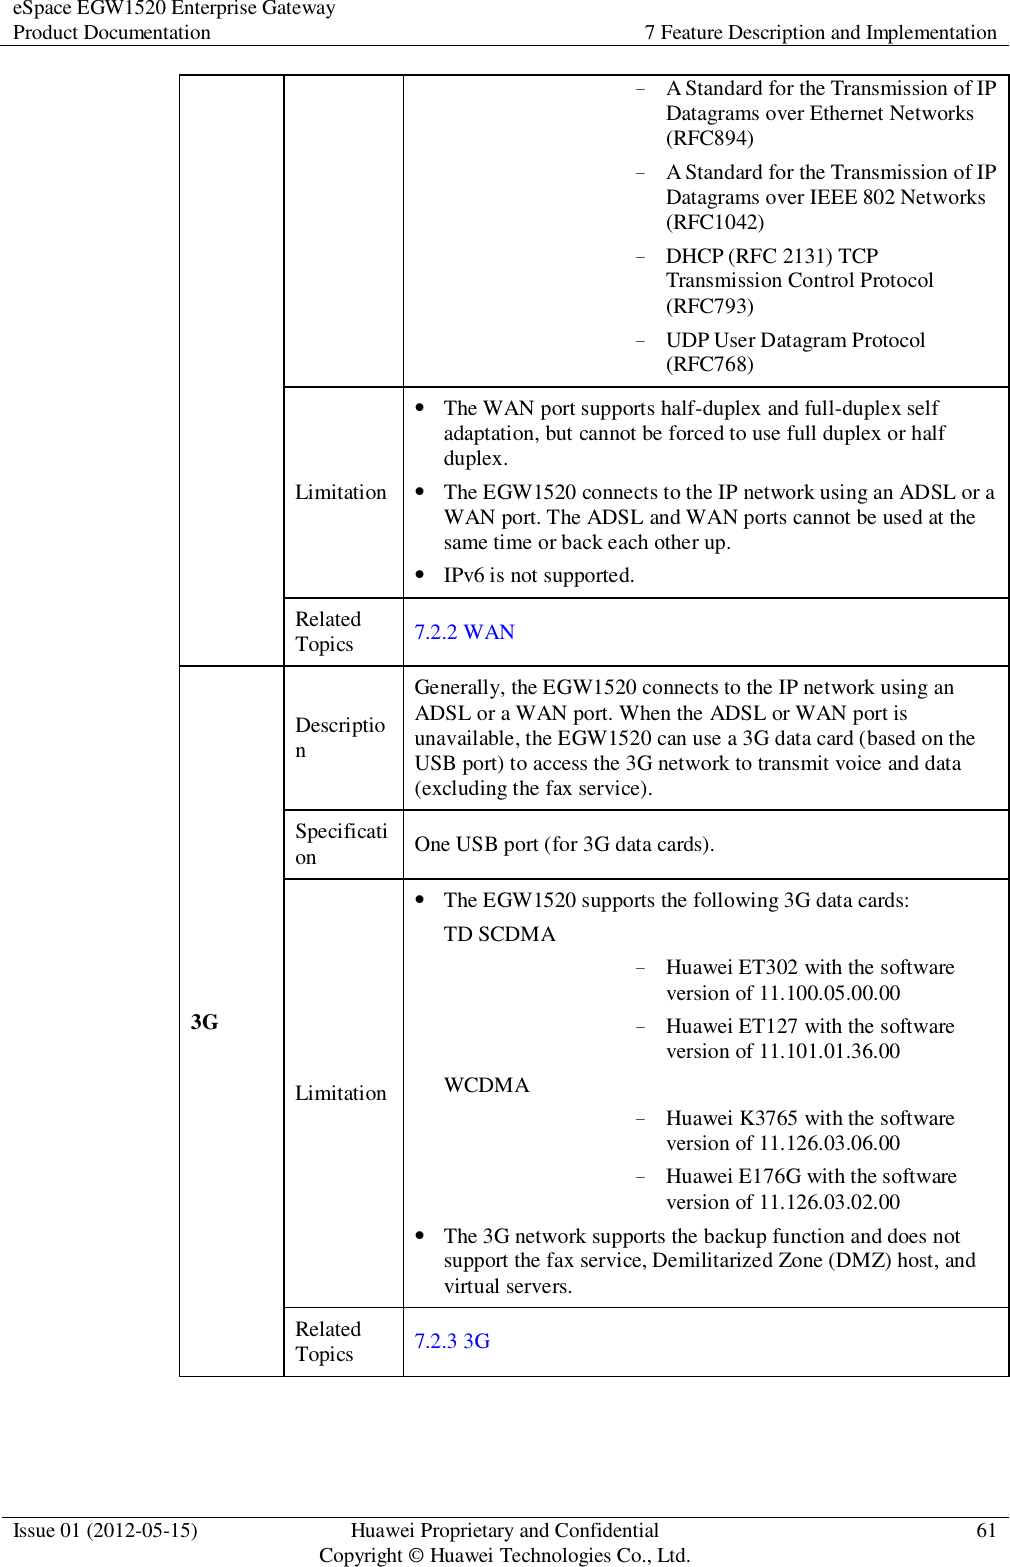 eSpace EGW1520 Enterprise Gateway Product Documentation 7 Feature Description and Implementation  Issue 01 (2012-05-15) Huawei Proprietary and Confidential                                     Copyright © Huawei Technologies Co., Ltd. 61  − A Standard for the Transmission of IP Datagrams over Ethernet Networks (RFC894) − A Standard for the Transmission of IP Datagrams over IEEE 802 Networks (RFC1042) − DHCP (RFC 2131) TCP Transmission Control Protocol (RFC793) − UDP User Datagram Protocol (RFC768) Limitation  The WAN port supports half-duplex and full-duplex self adaptation, but cannot be forced to use full duplex or half duplex.  The EGW1520 connects to the IP network using an ADSL or a WAN port. The ADSL and WAN ports cannot be used at the same time or back each other up.  IPv6 is not supported. Related Topics 7.2.2 WAN 3G Description Generally, the EGW1520 connects to the IP network using an ADSL or a WAN port. When the ADSL or WAN port is unavailable, the EGW1520 can use a 3G data card (based on the USB port) to access the 3G network to transmit voice and data (excluding the fax service). Specification One USB port (for 3G data cards). Limitation  The EGW1520 supports the following 3G data cards: TD SCDMA − Huawei ET302 with the software version of 11.100.05.00.00 − Huawei ET127 with the software version of 11.101.01.36.00 WCDMA − Huawei K3765 with the software version of 11.126.03.06.00 − Huawei E176G with the software version of 11.126.03.02.00  The 3G network supports the backup function and does not support the fax service, Demilitarized Zone (DMZ) host, and virtual servers. Related Topics 7.2.3 3G  